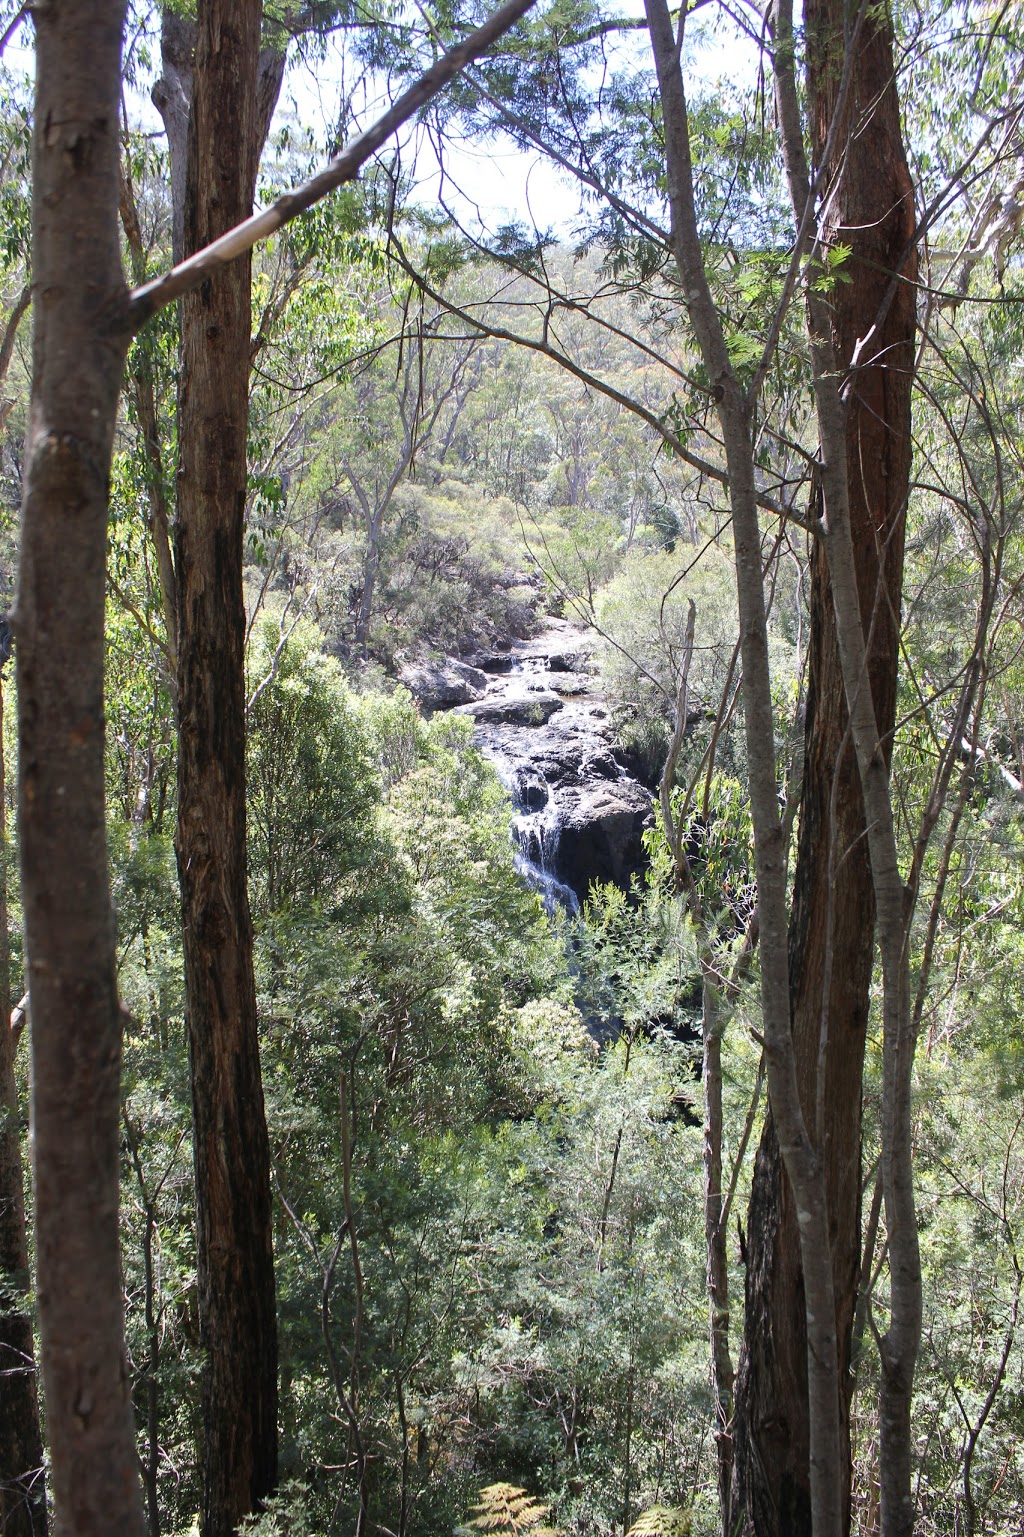 Boundary Falls Campground | campground | Wades Road, Moogem NSW 2370, Australia | 0267390700 OR +61 2 6739 0700